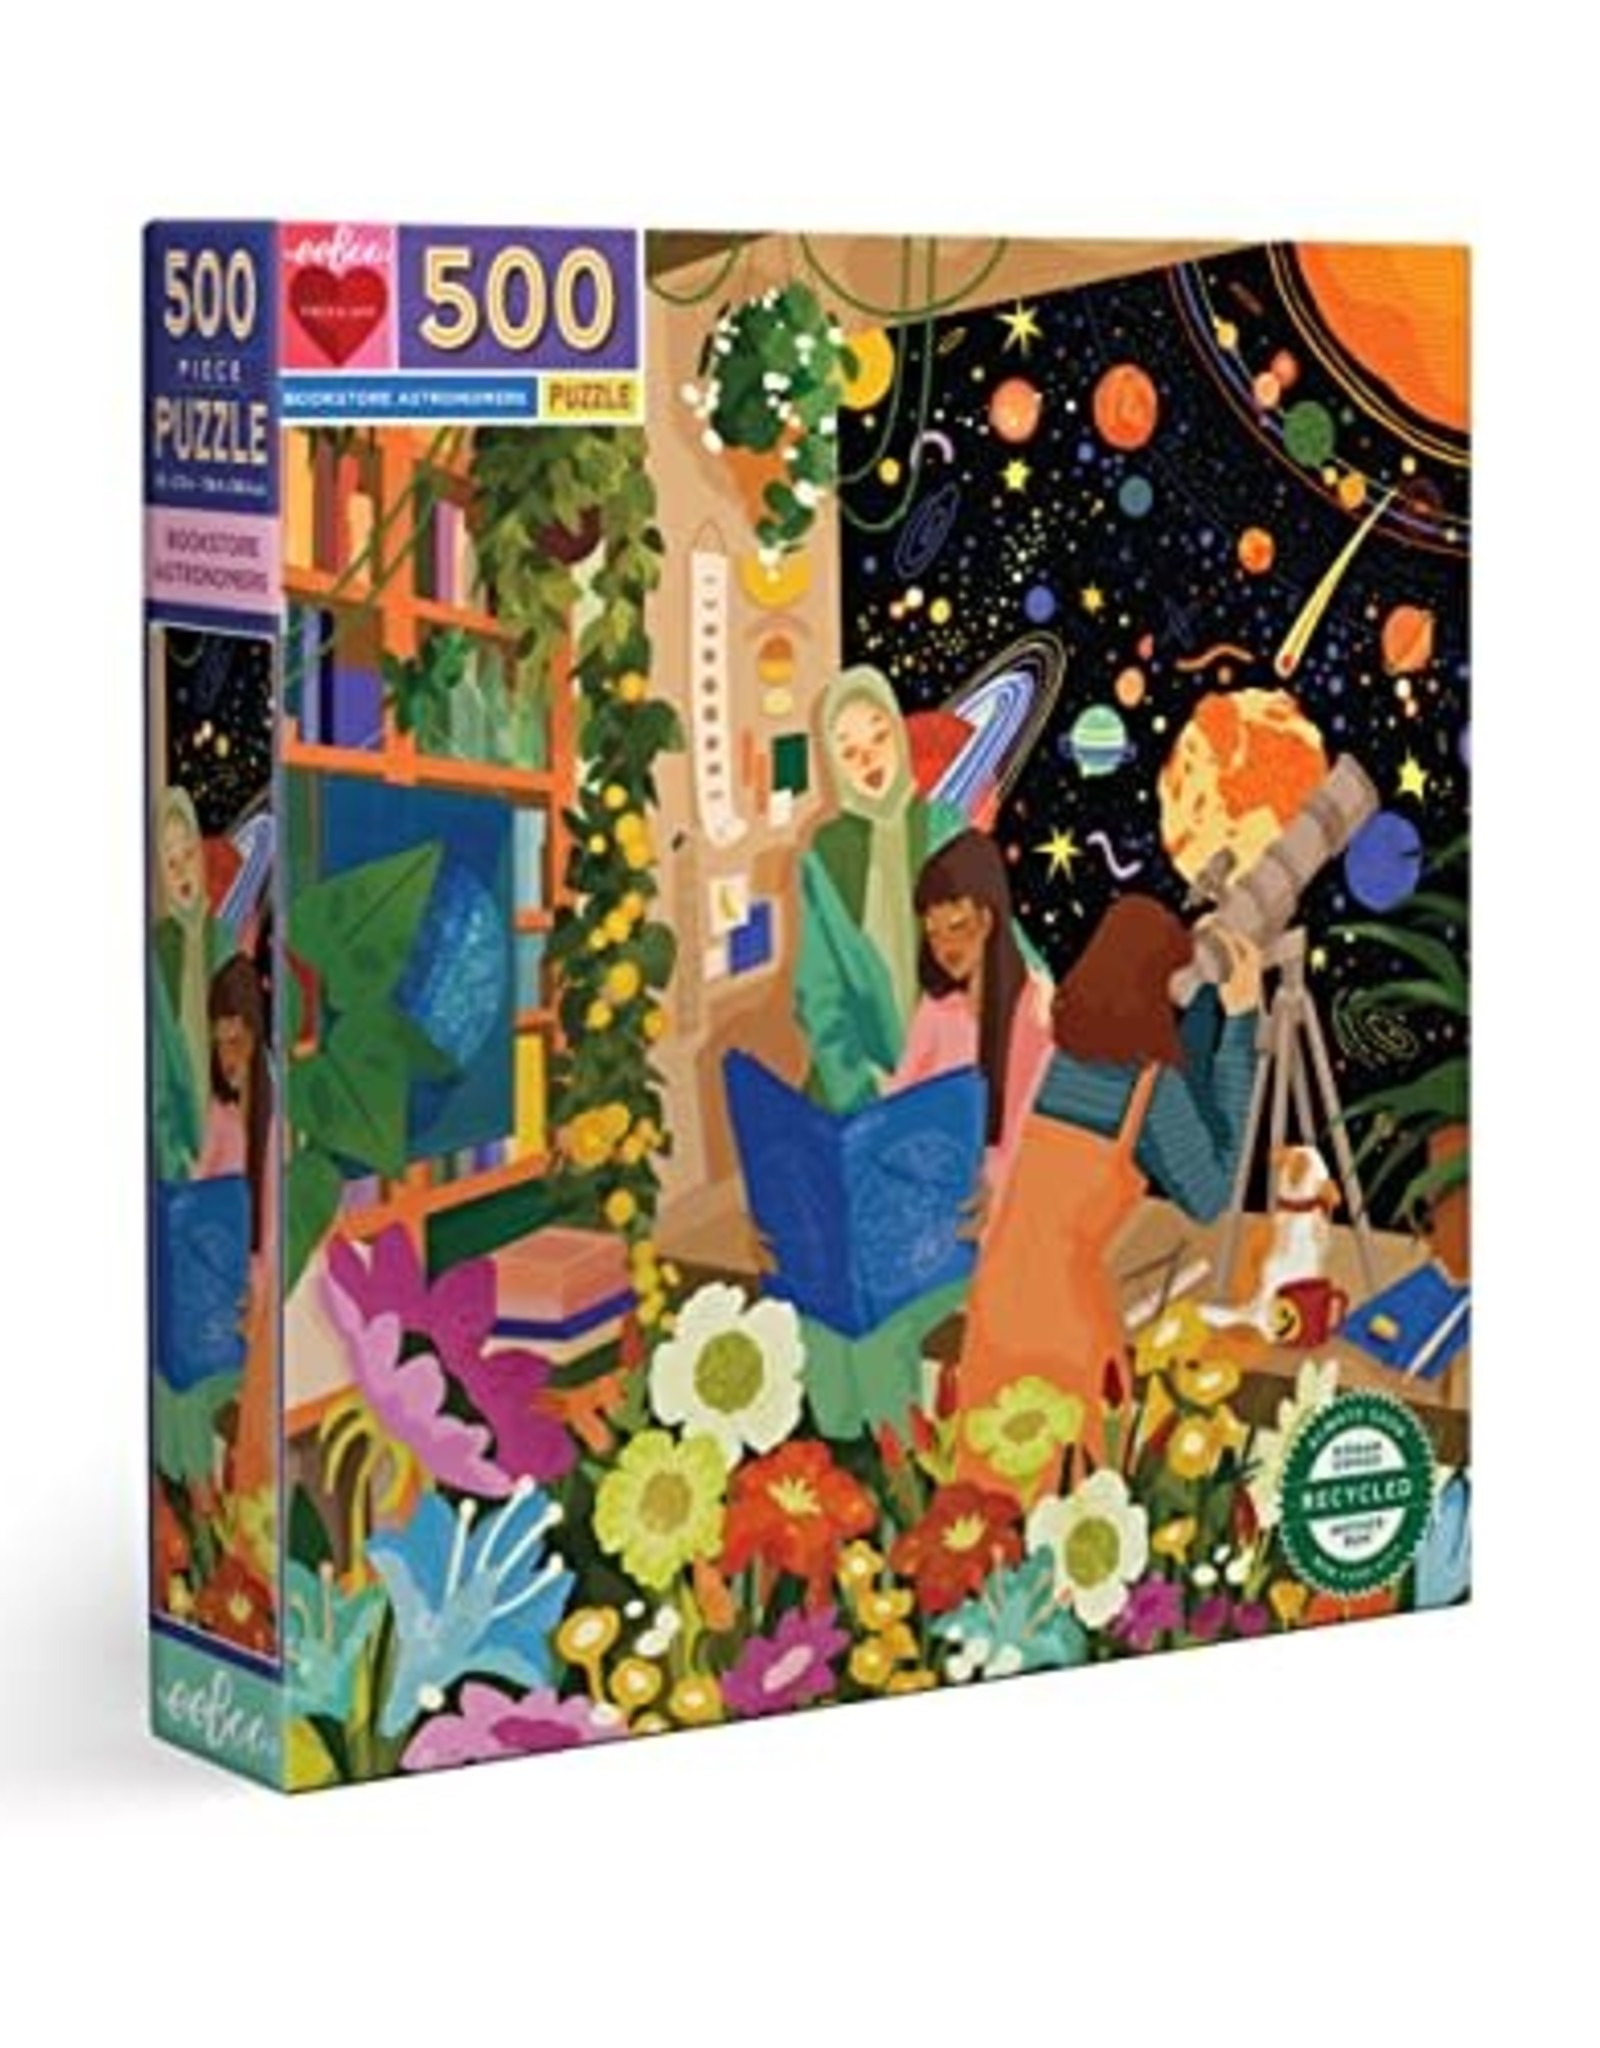 EEBOO BOOKSTORE ASTRONOMERS 500 PC PUZZLE